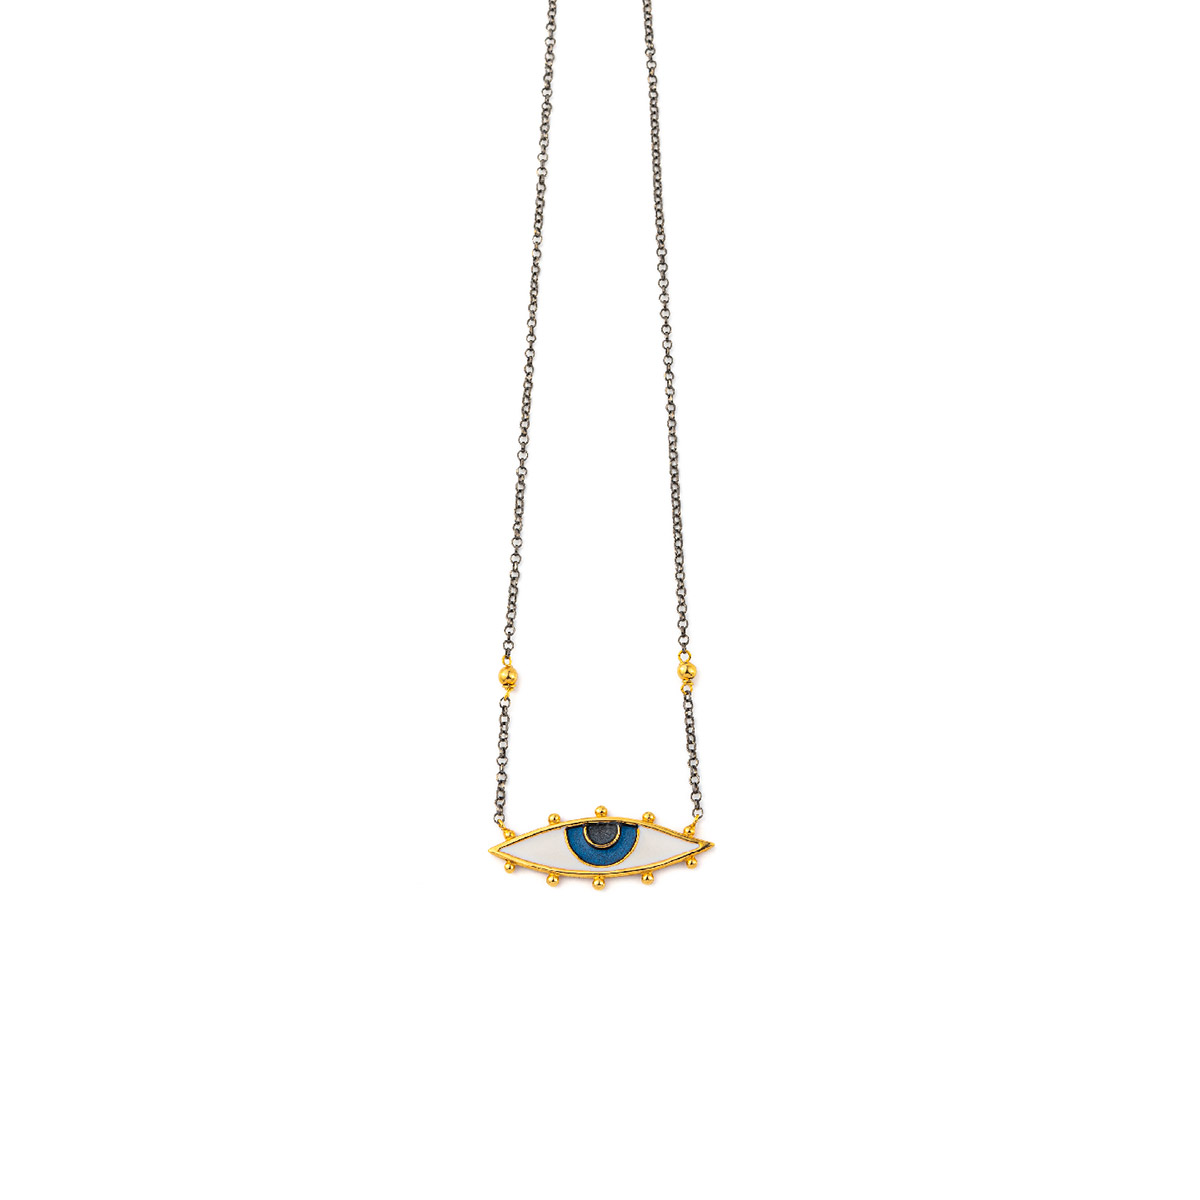 Chain Necklace with a Colored Evil Eye – 925 Sterling Silver